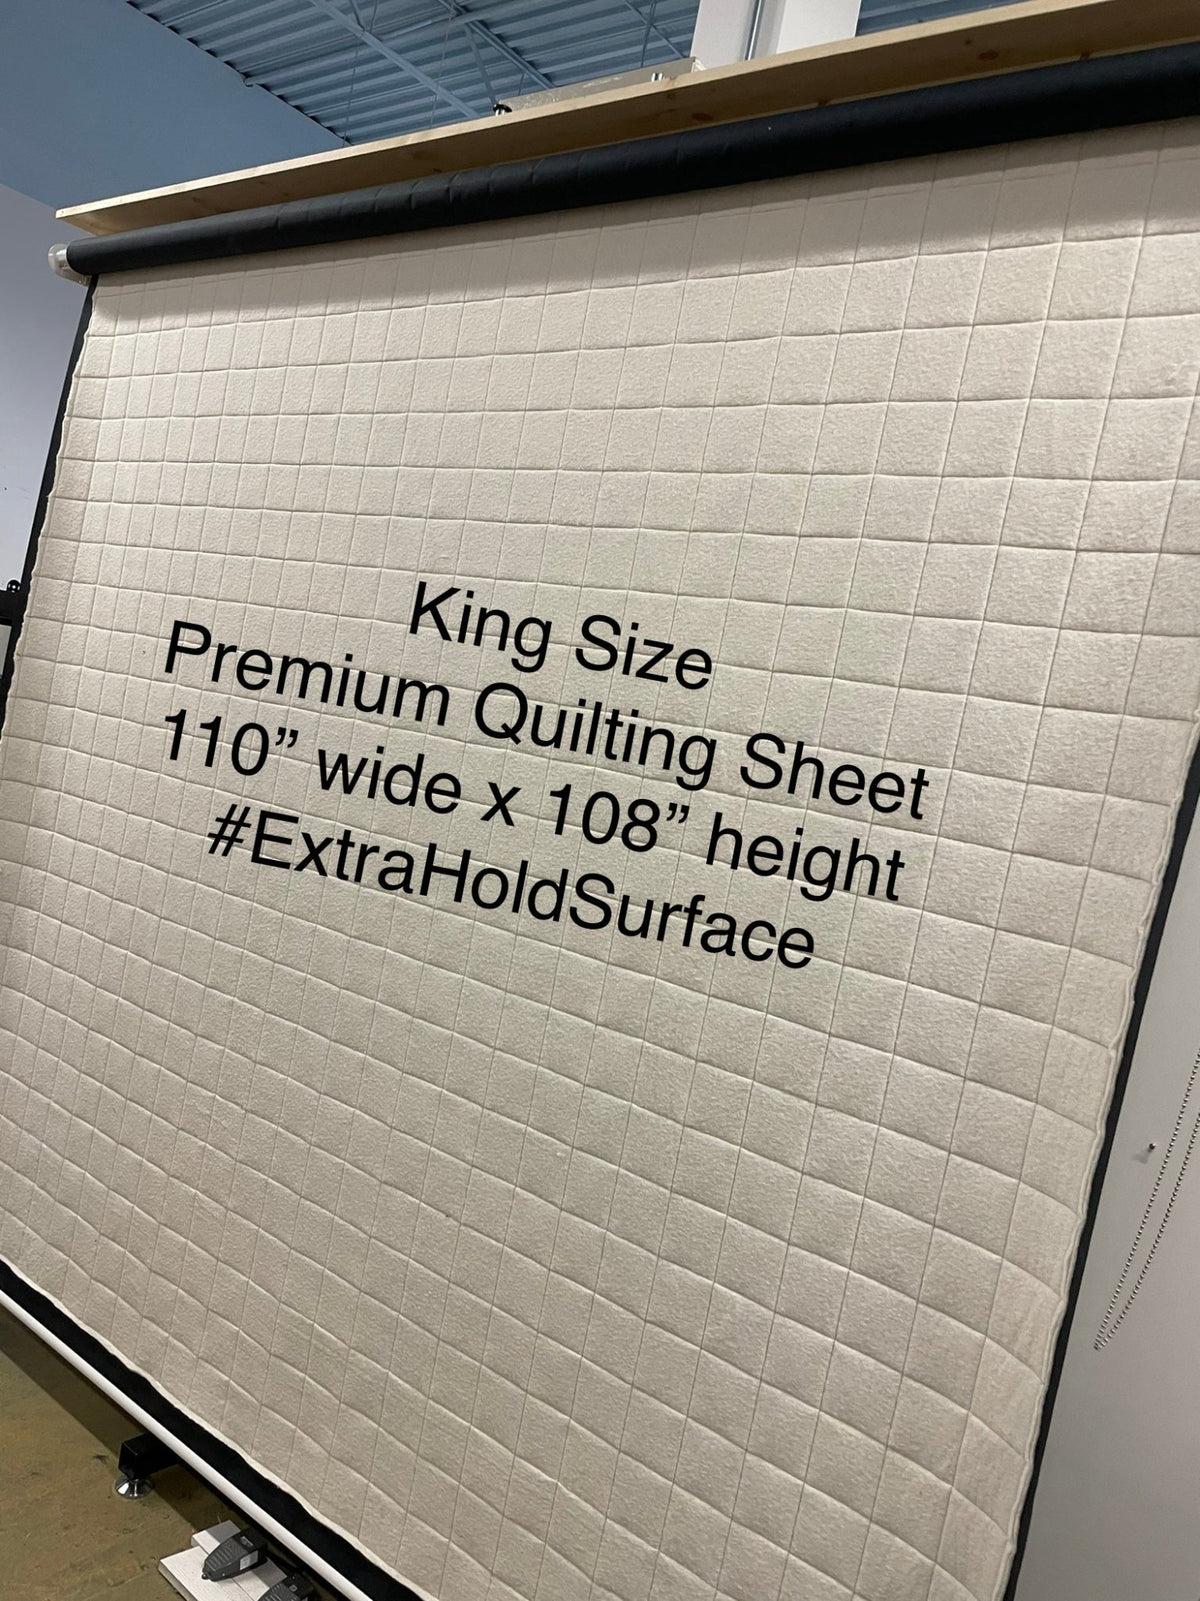 Premium Quilting Wall - King Size - Basic (Hardware with lead sheet only- no quilting sheet)